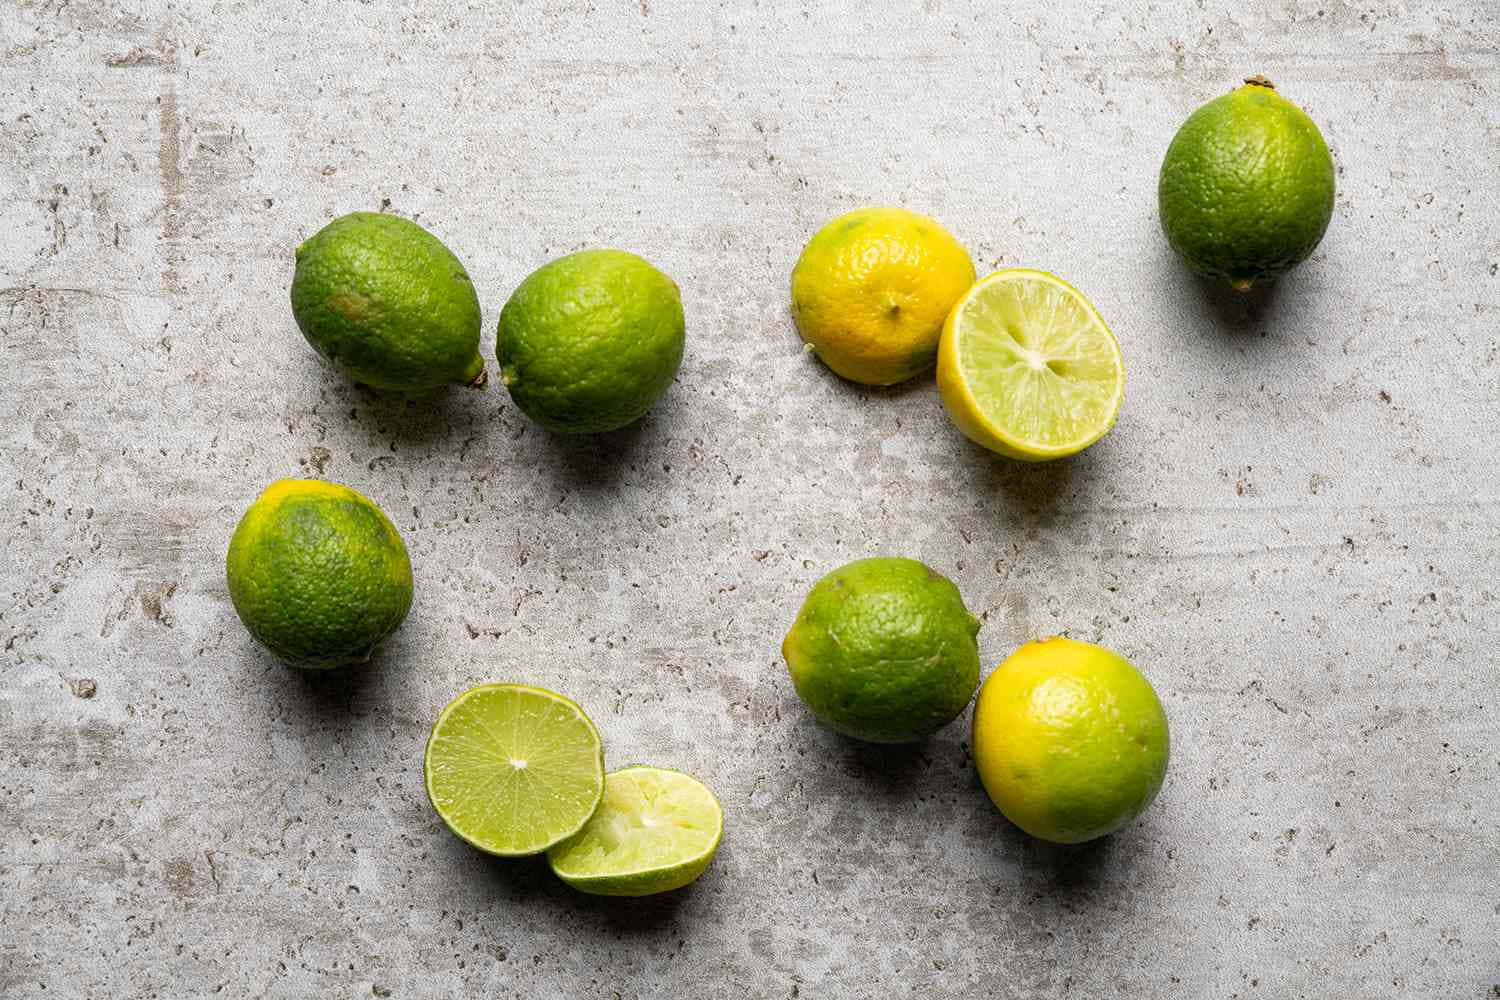 Limes And Lemons On A Concrete Surface